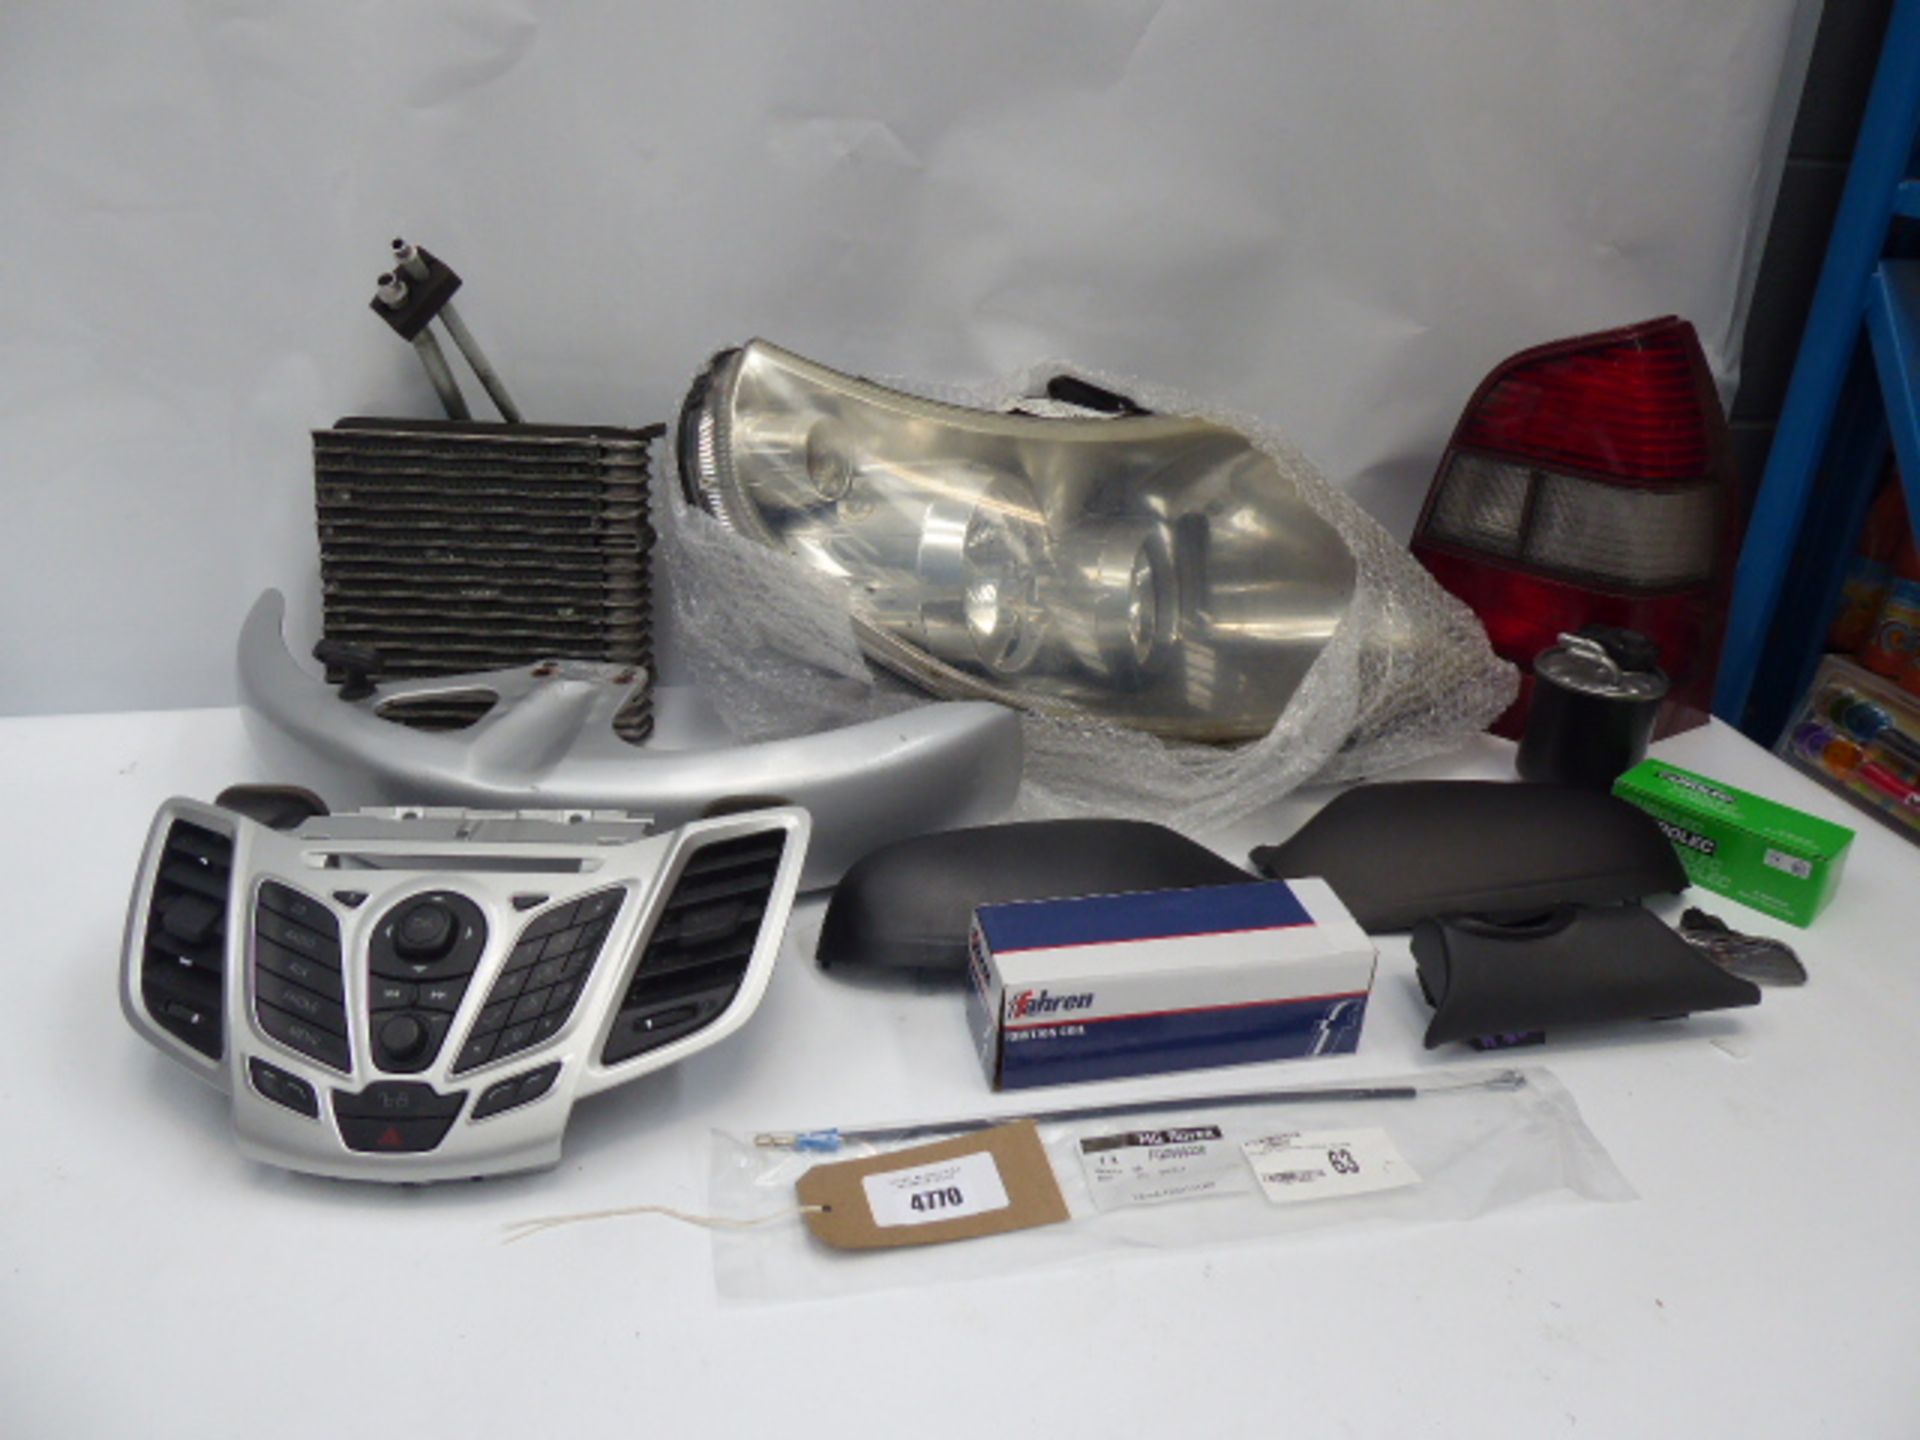 4088 Large headlight (damaged bracket), tail light, mirror covers, heater rad, ignition coil and